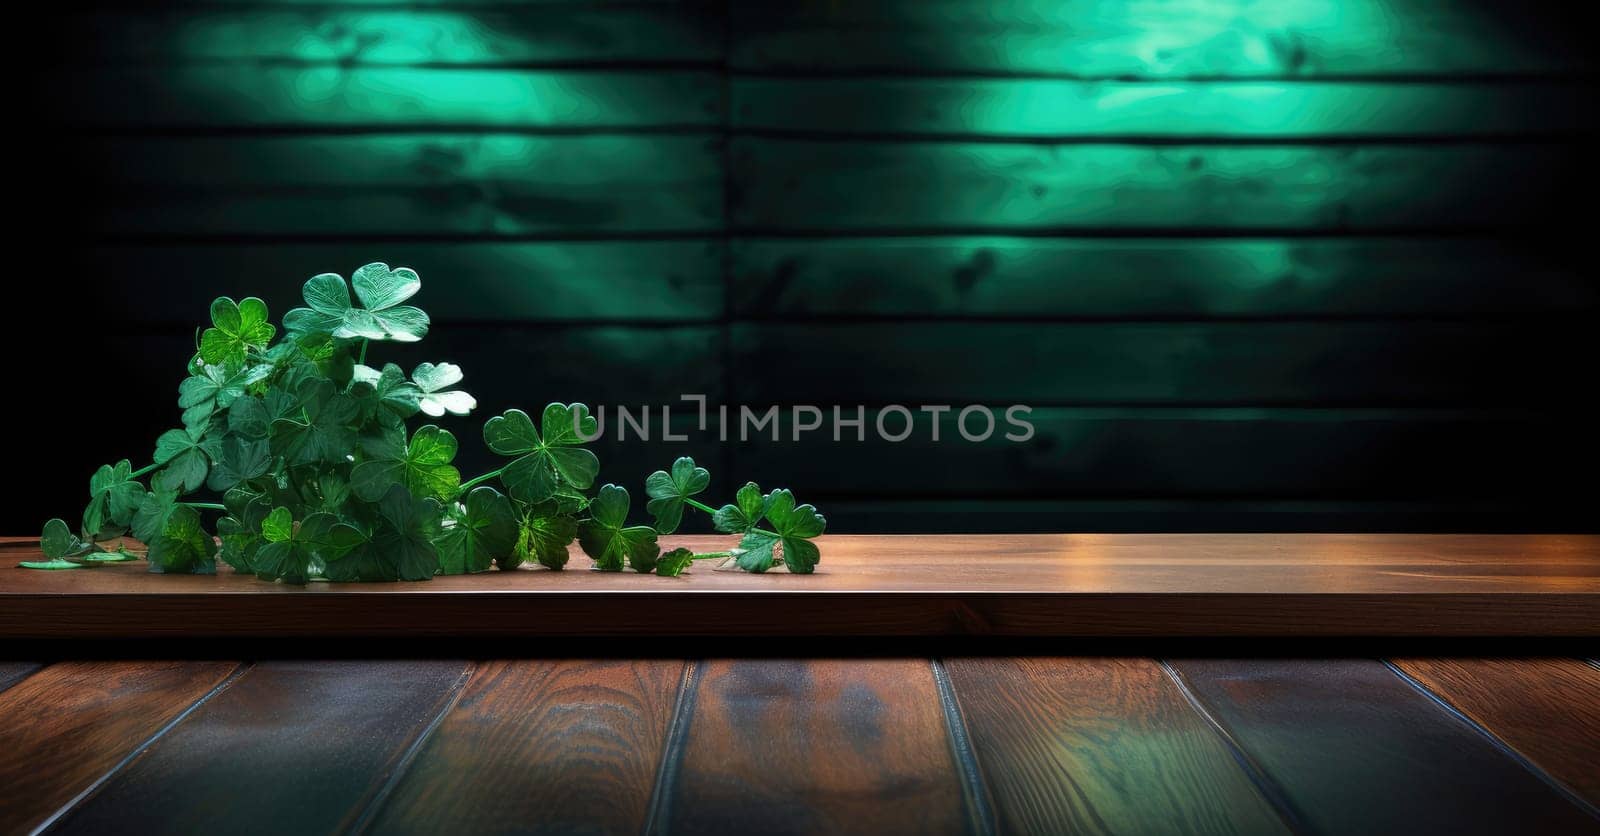 the empty wooden top with background of brick , Patrick's day theme decorations in green , green neon a shamrock leaf on background --ar 3:2 --style raw --stylize 250 Job ID: 6d00a1b4-1ed2-4ba0-aba5-77d7bed3cfb7